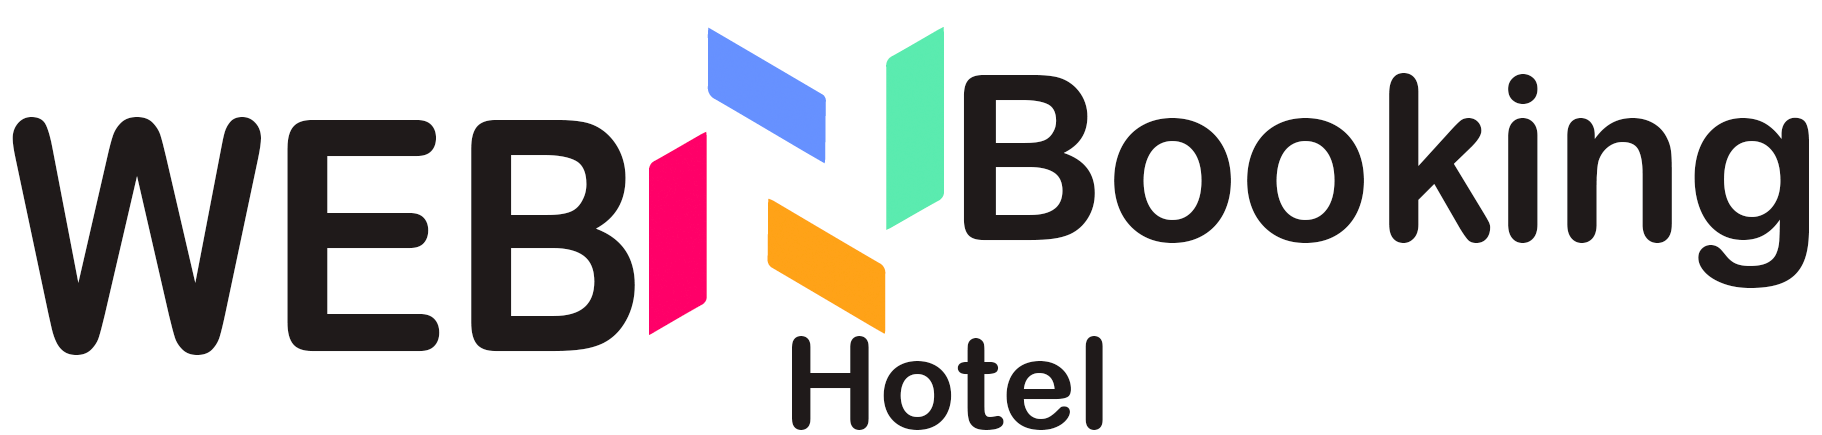 WebBookingHotel.com | A better deal on your next hotel, motel or accommodation booking.